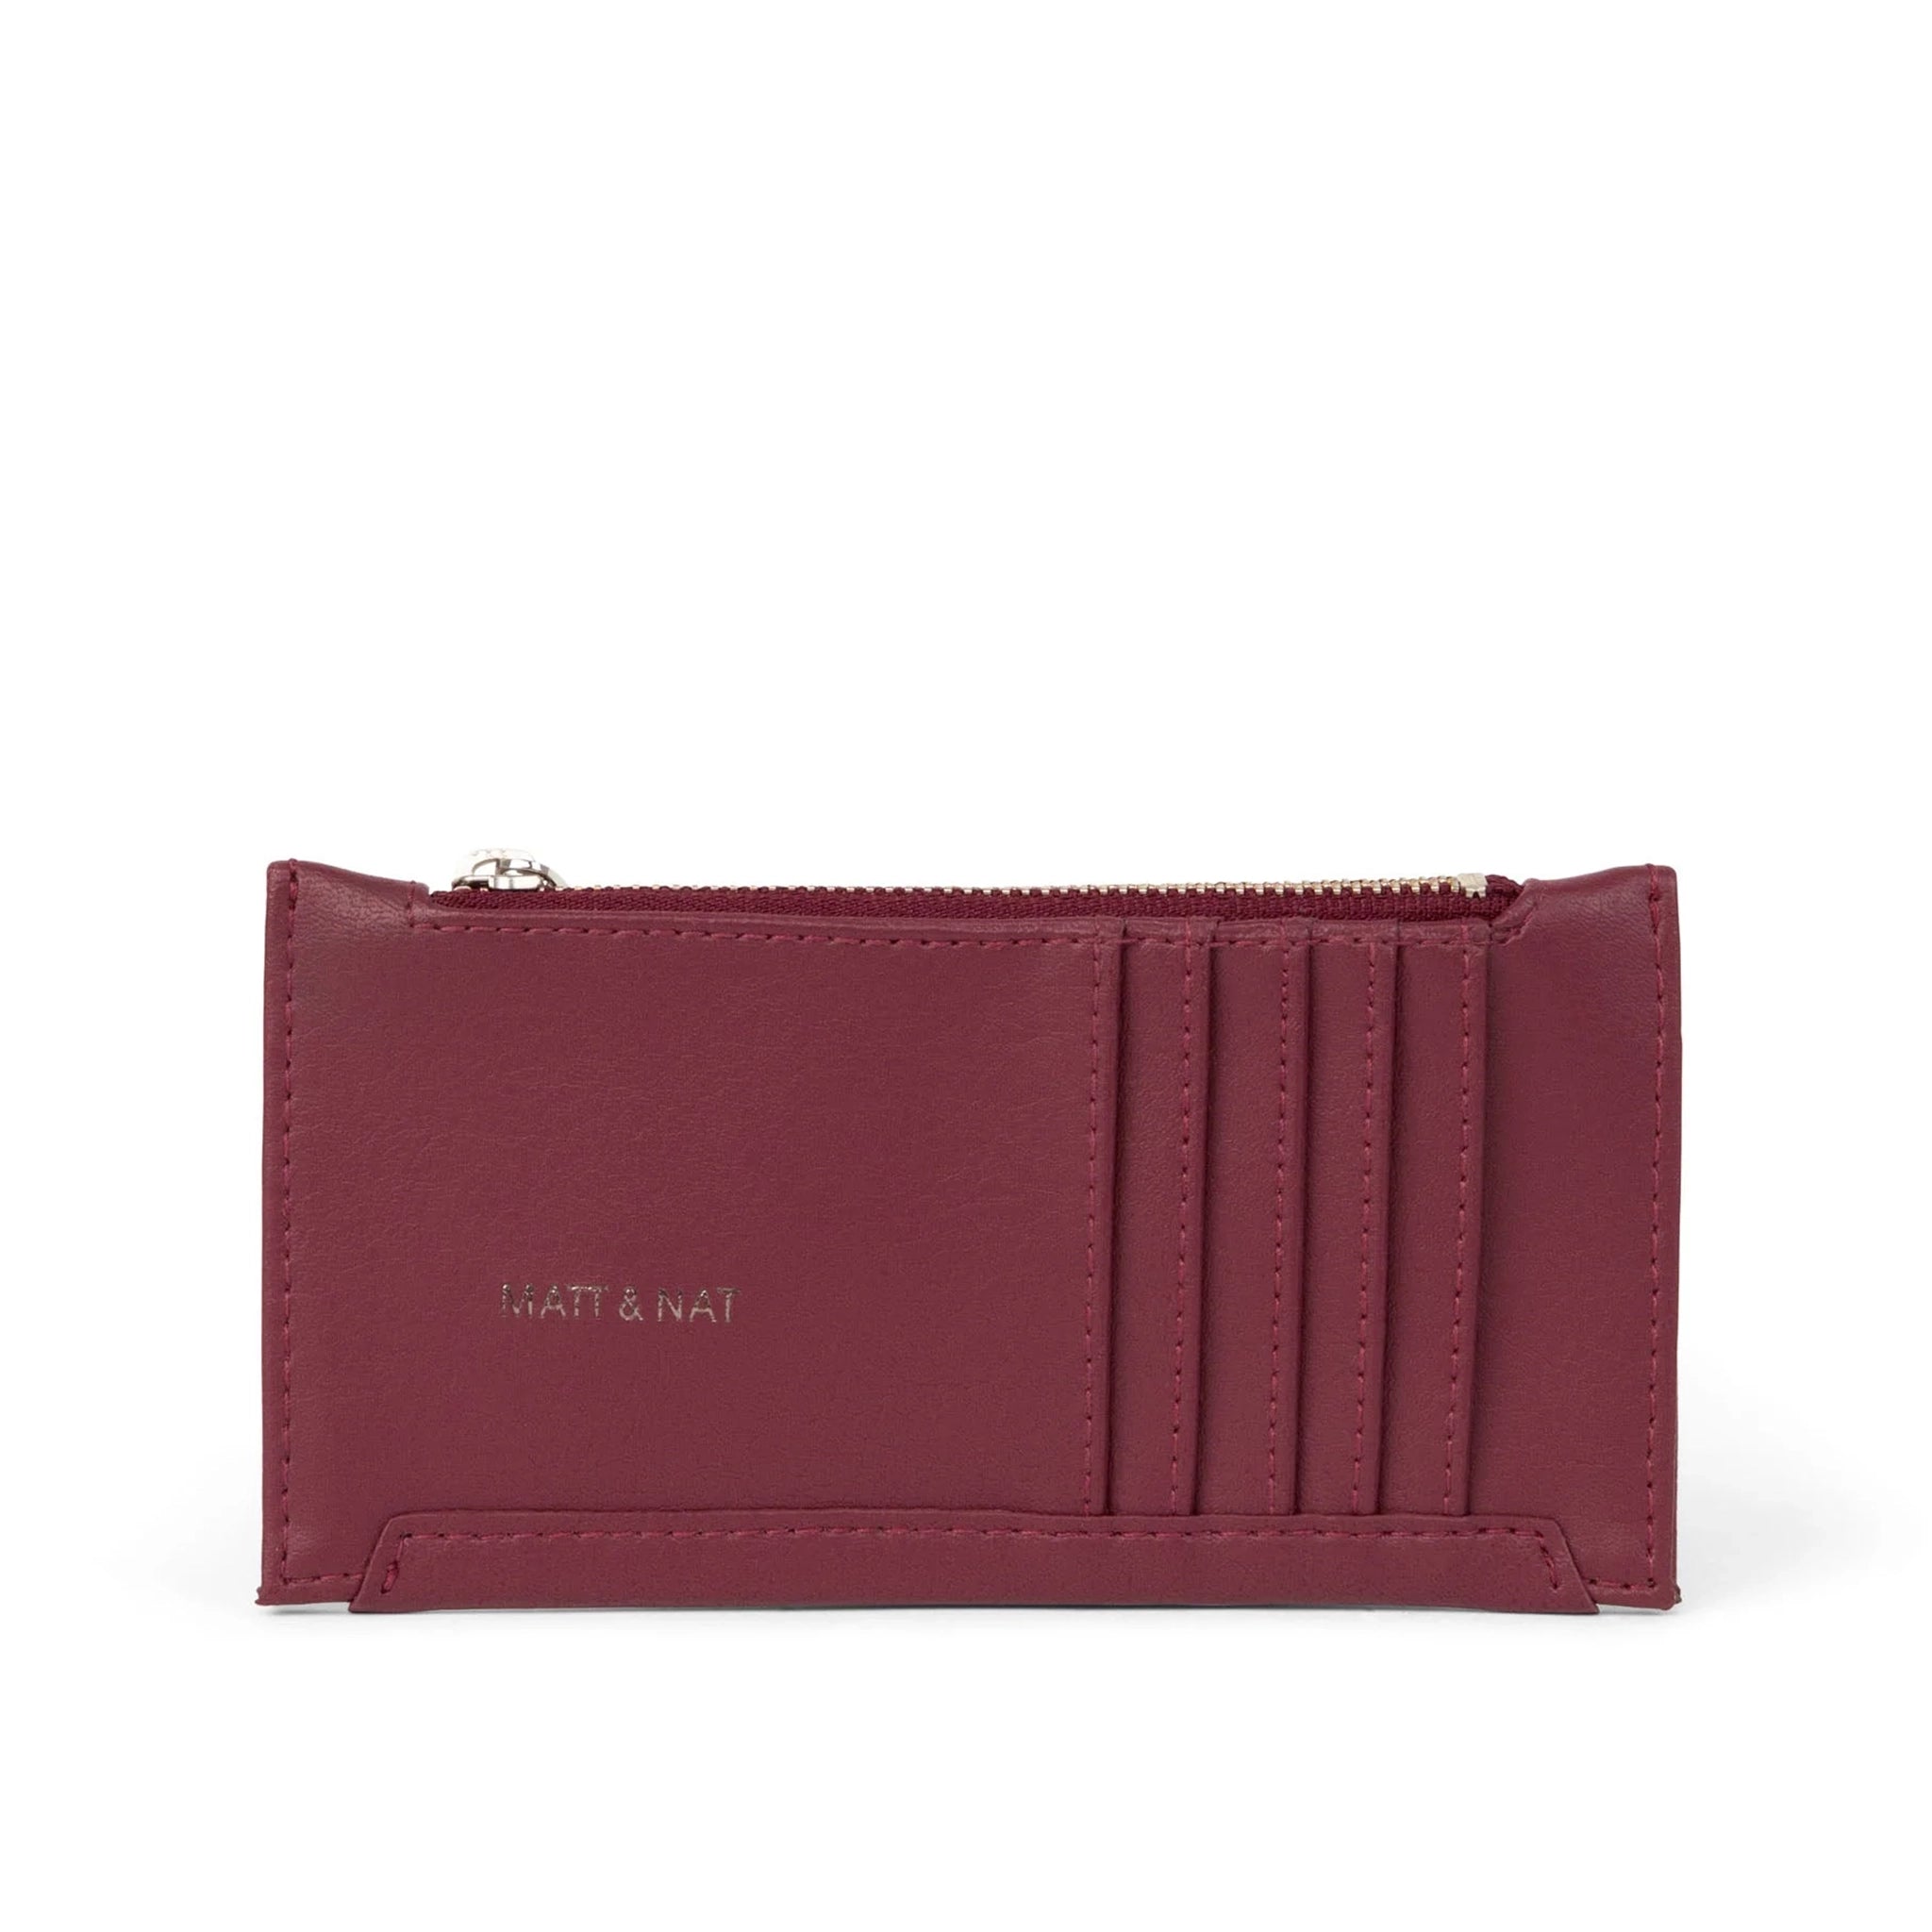 On a white background is a dark cherry red with card slots on the outside and a zipper pocket. 